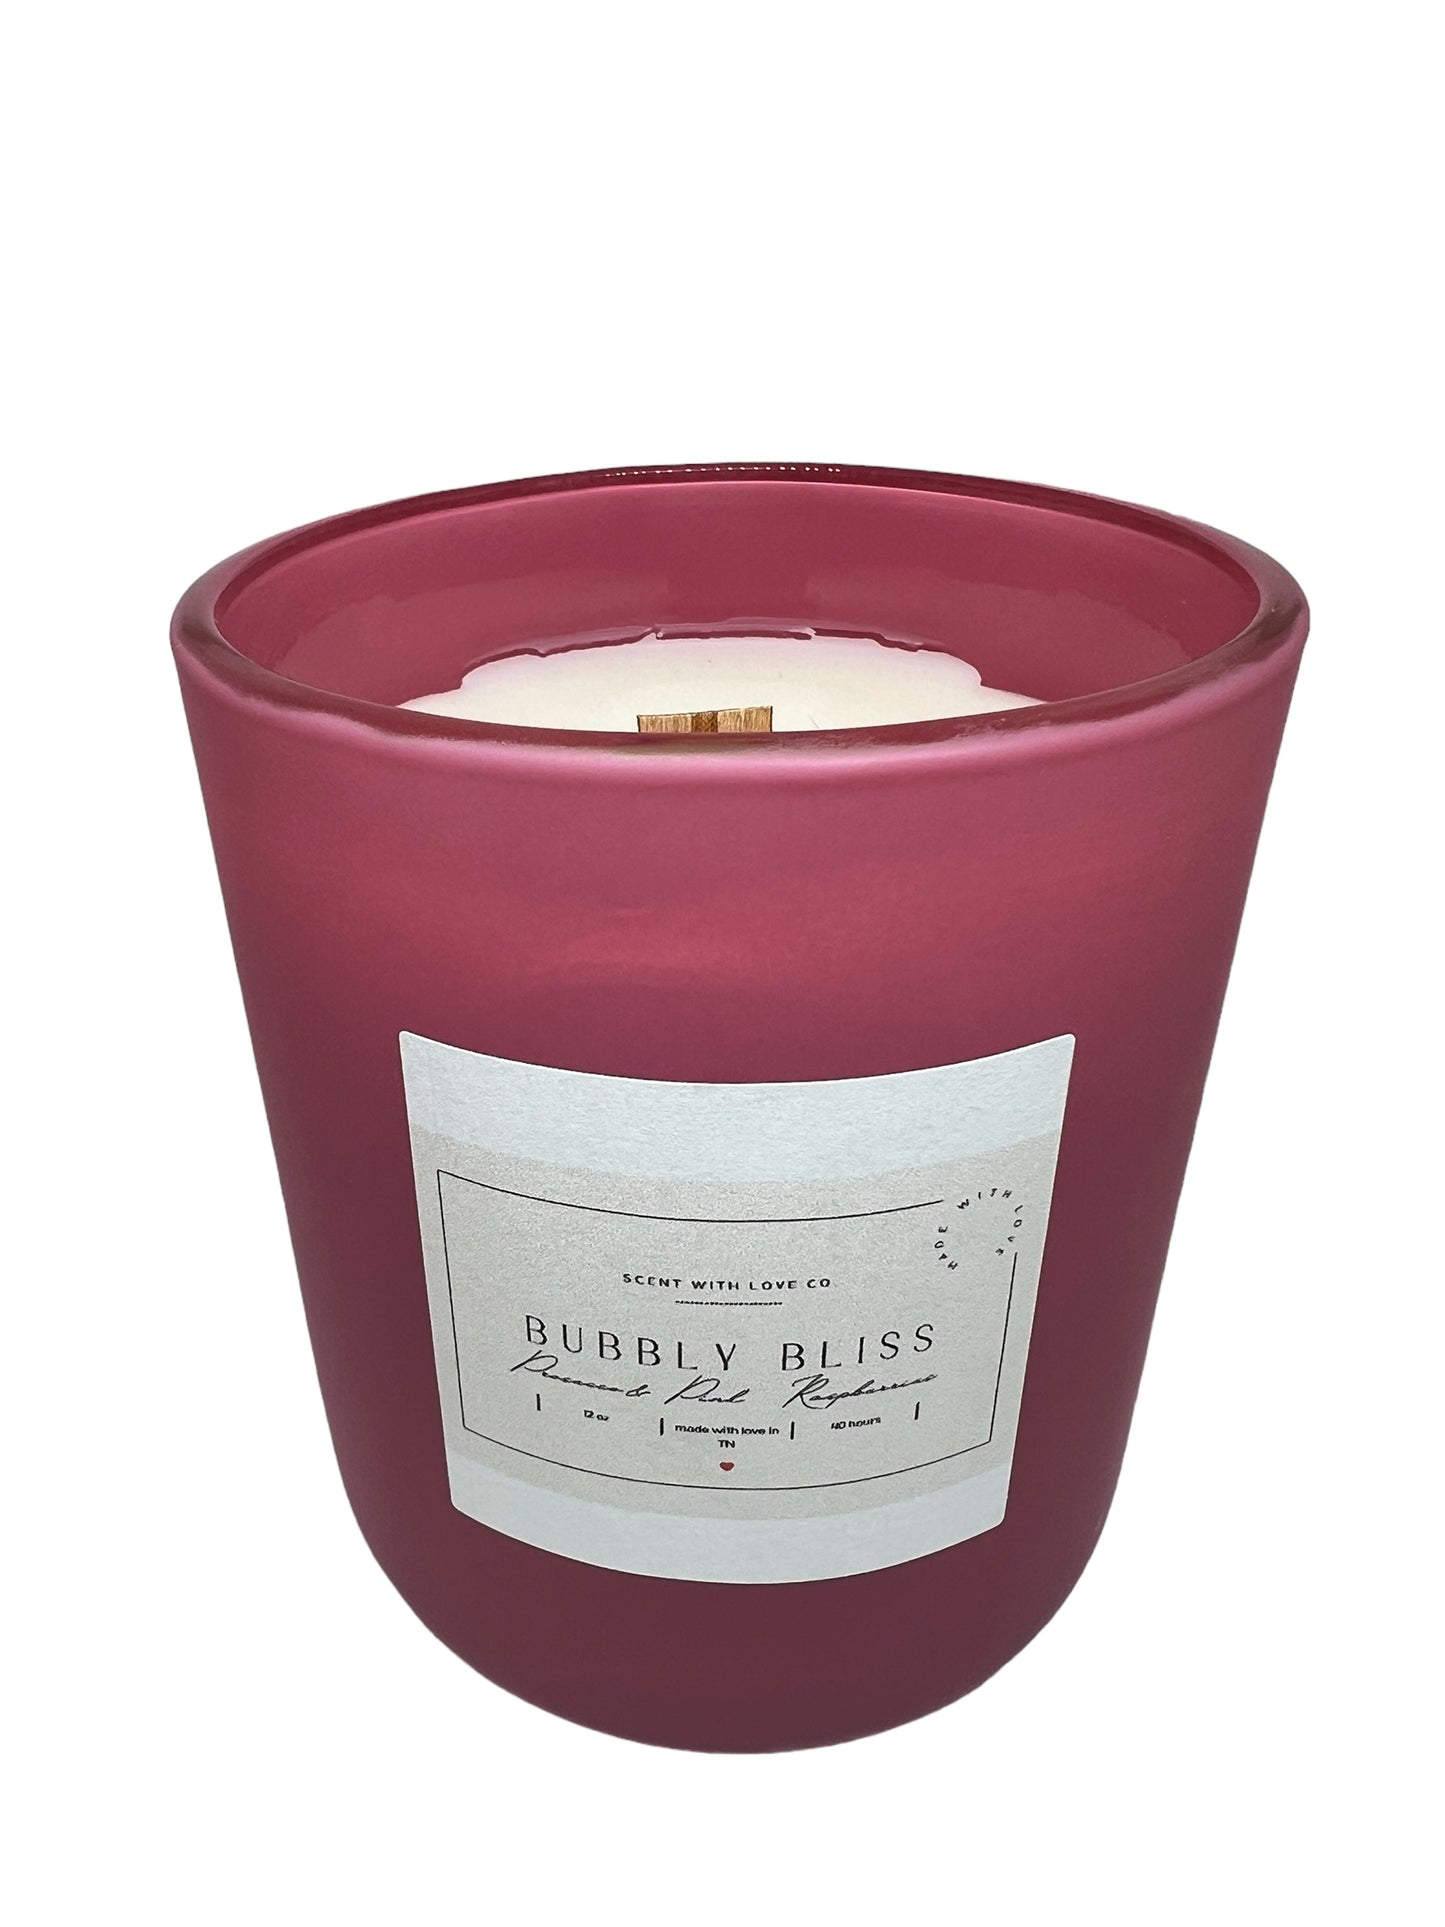 "Bubbly Bliss" - Prosecco and Pink Raspberries 12 oz Candle